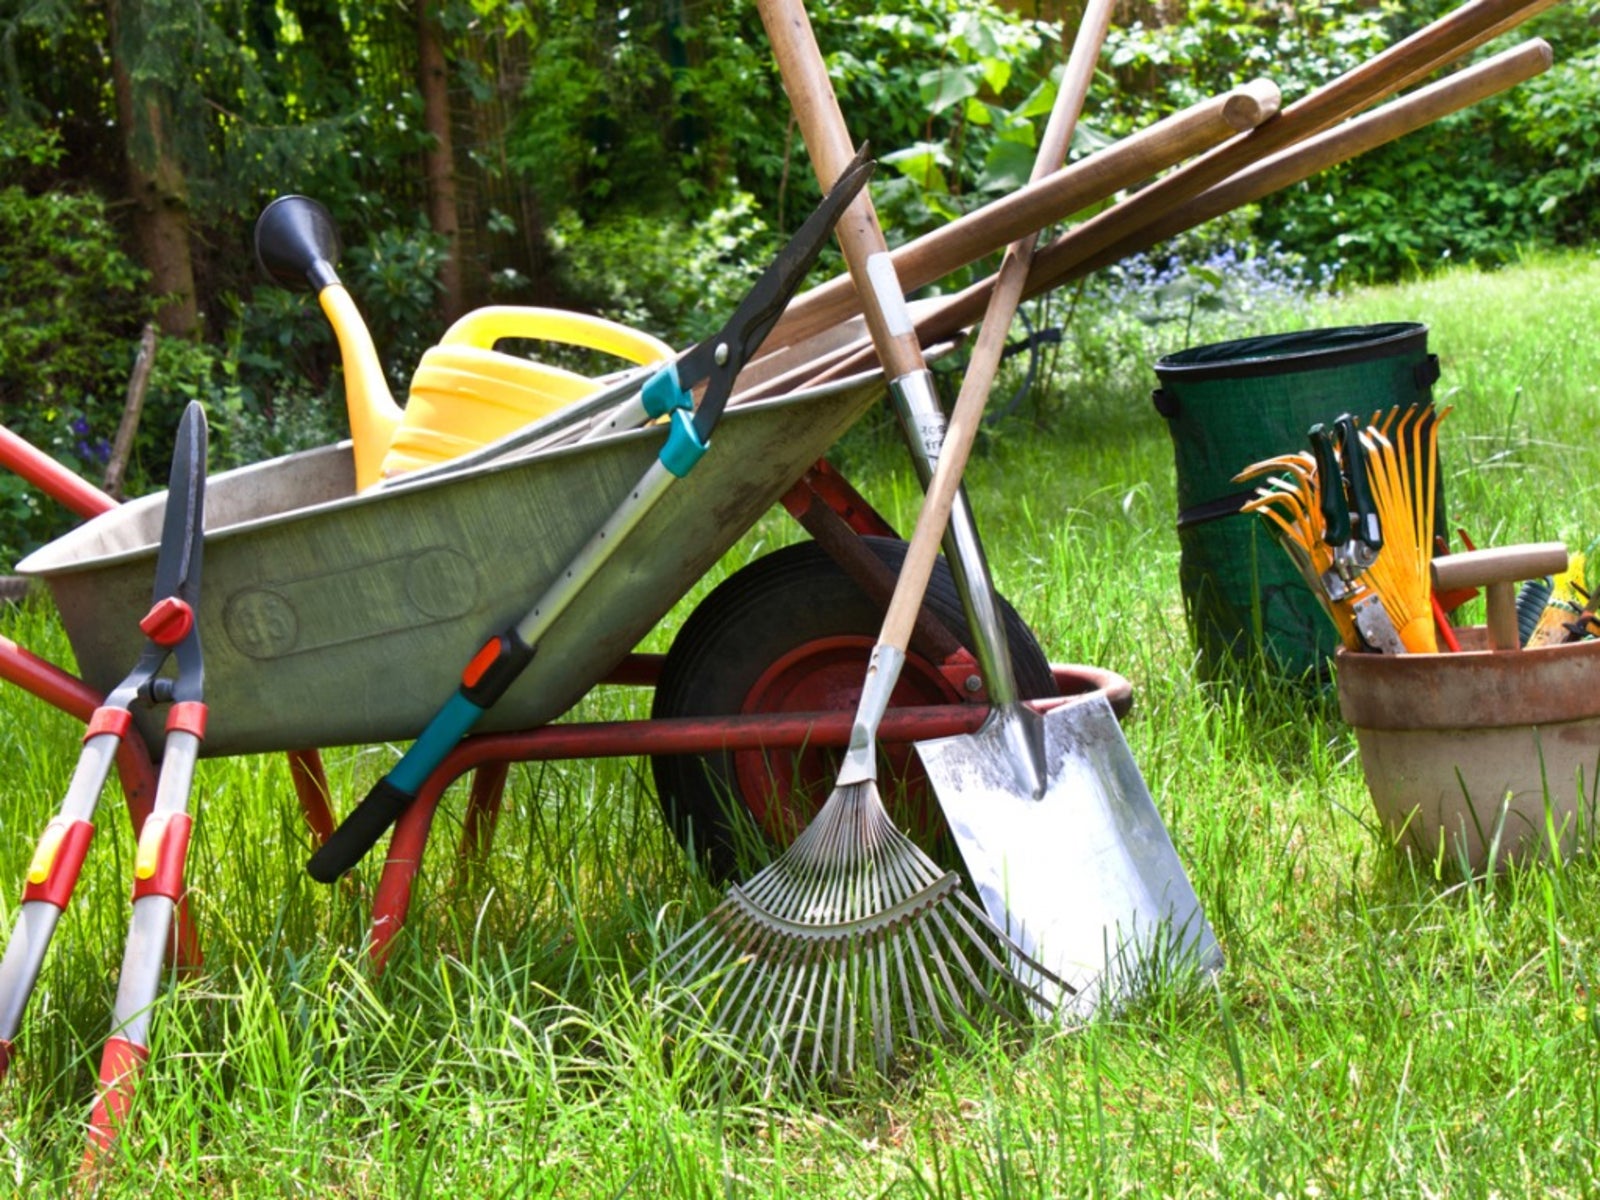 Information About Gardening Tools: Must Have Tools For Garden And Lawn Care